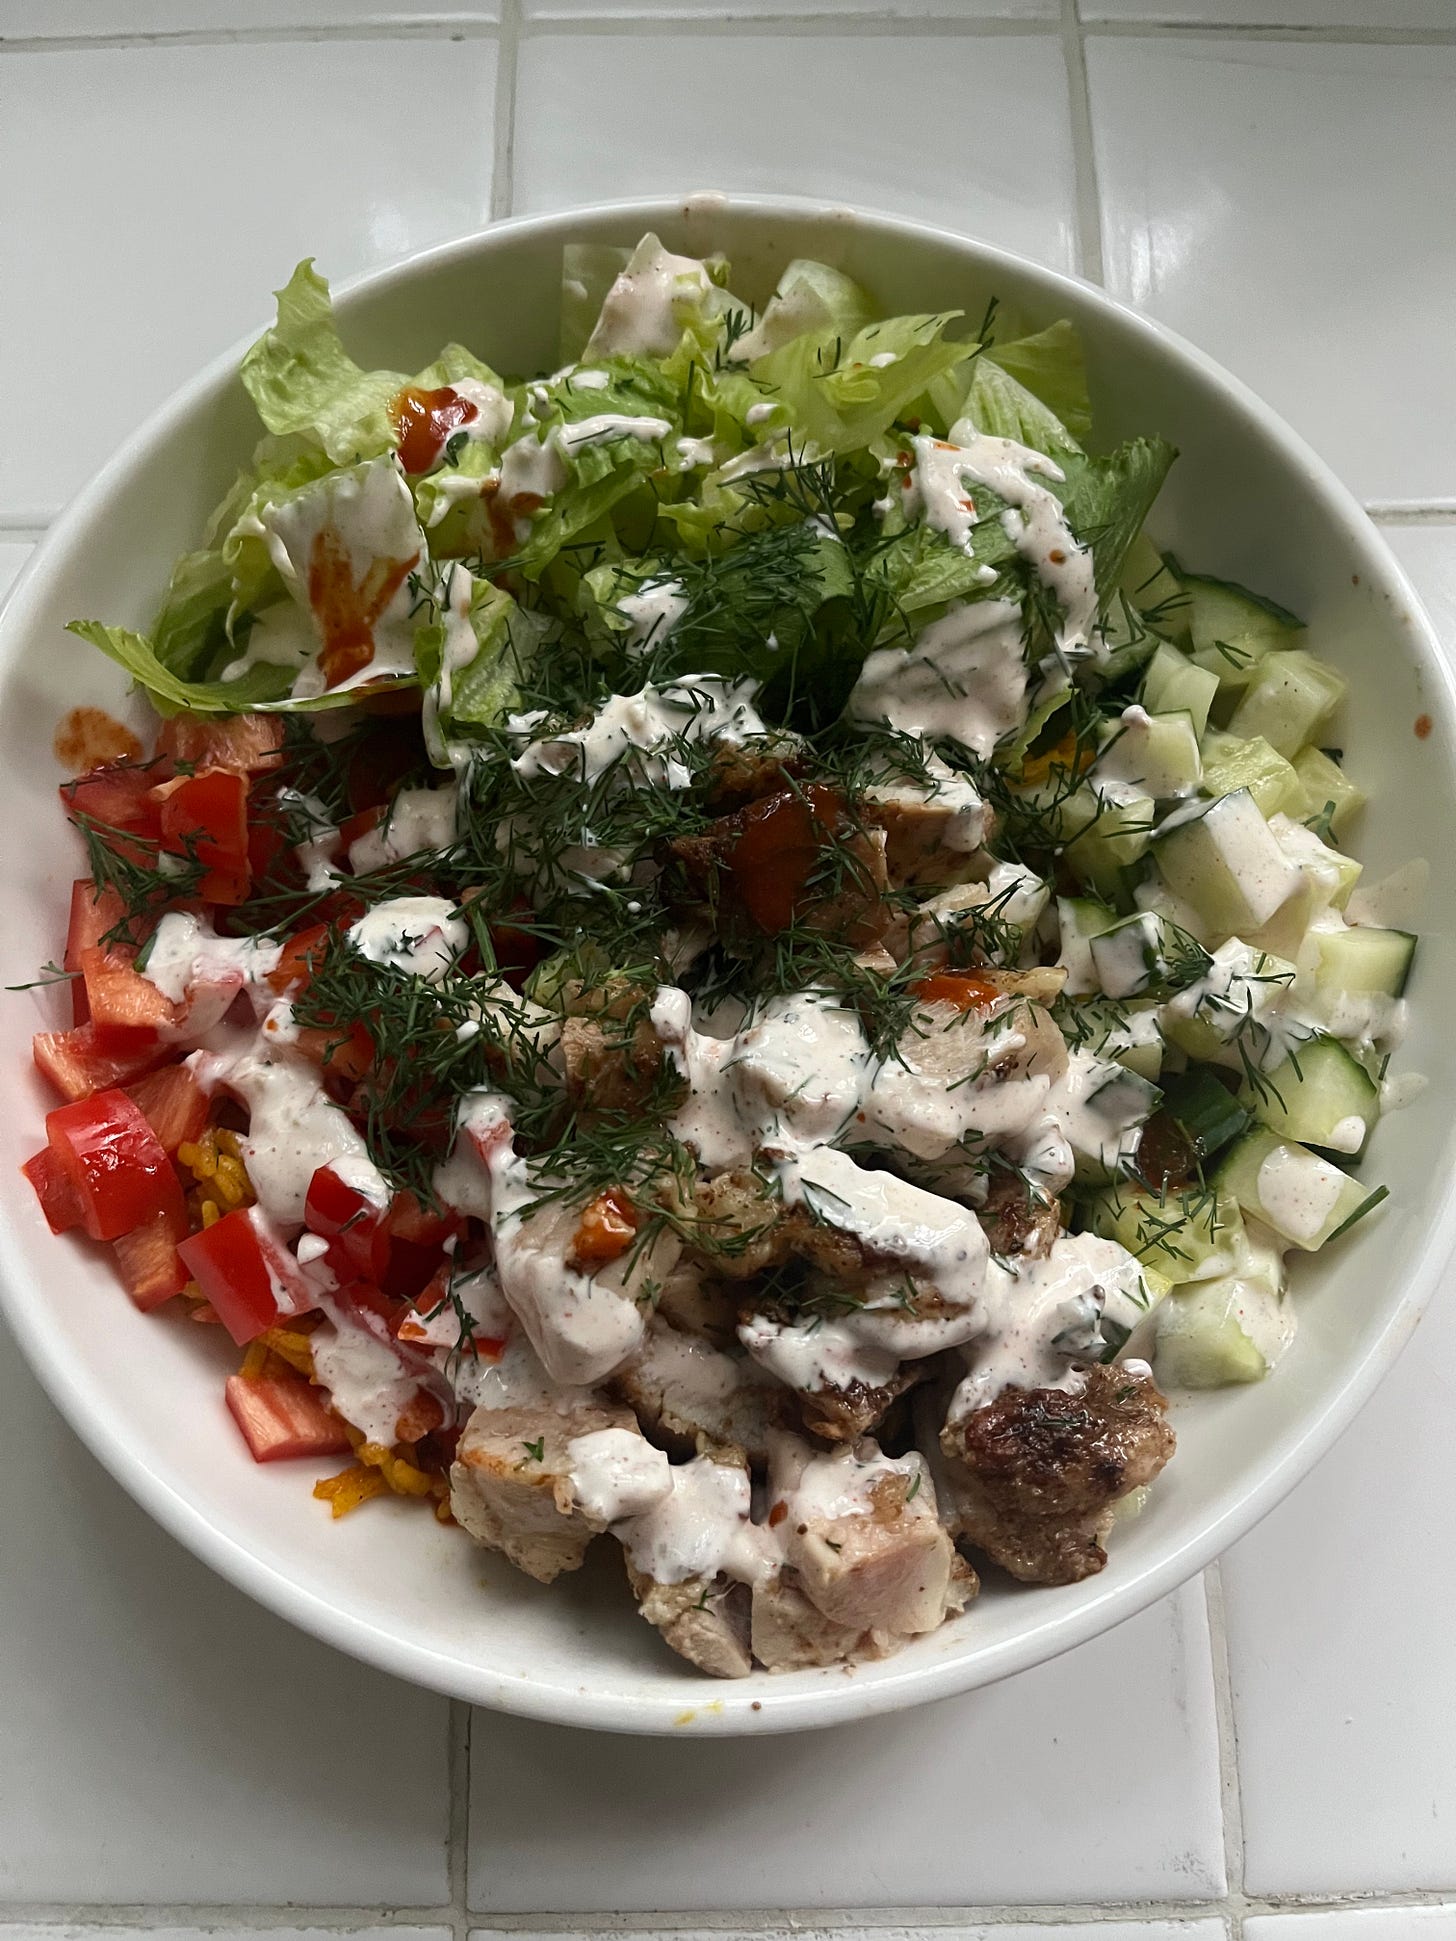 The same chicken bowl, now with white sauce, hot sauce and fresh dill